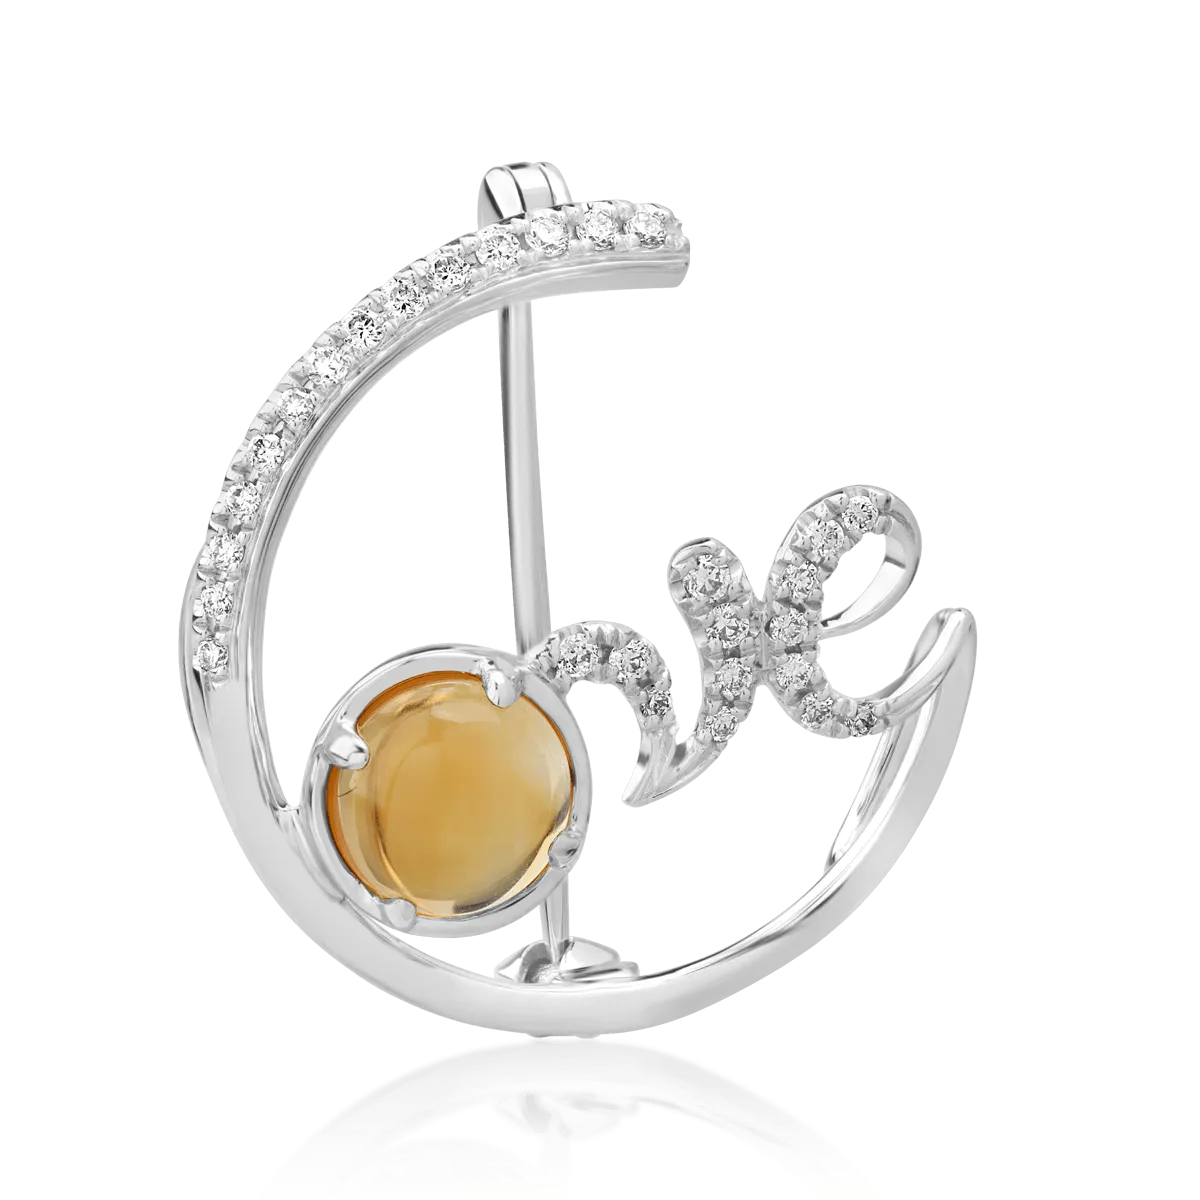 18K white gold brooch with 0.89ct citrine and 0.14ct diamonds